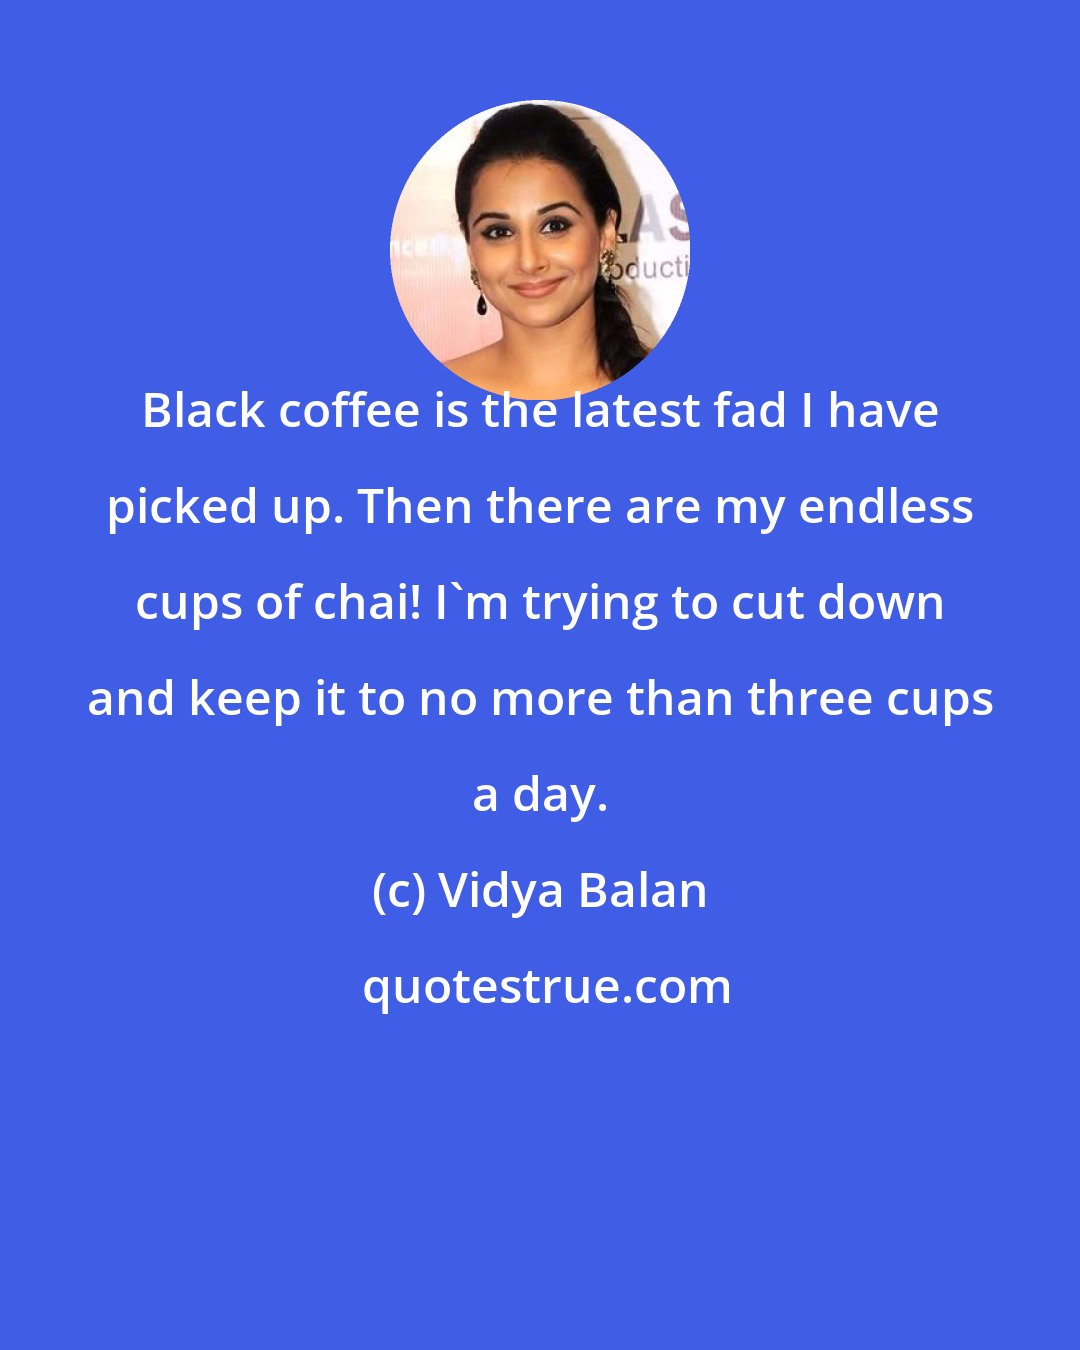 Vidya Balan: Black coffee is the latest fad I have picked up. Then there are my endless cups of chai! I'm trying to cut down and keep it to no more than three cups a day.